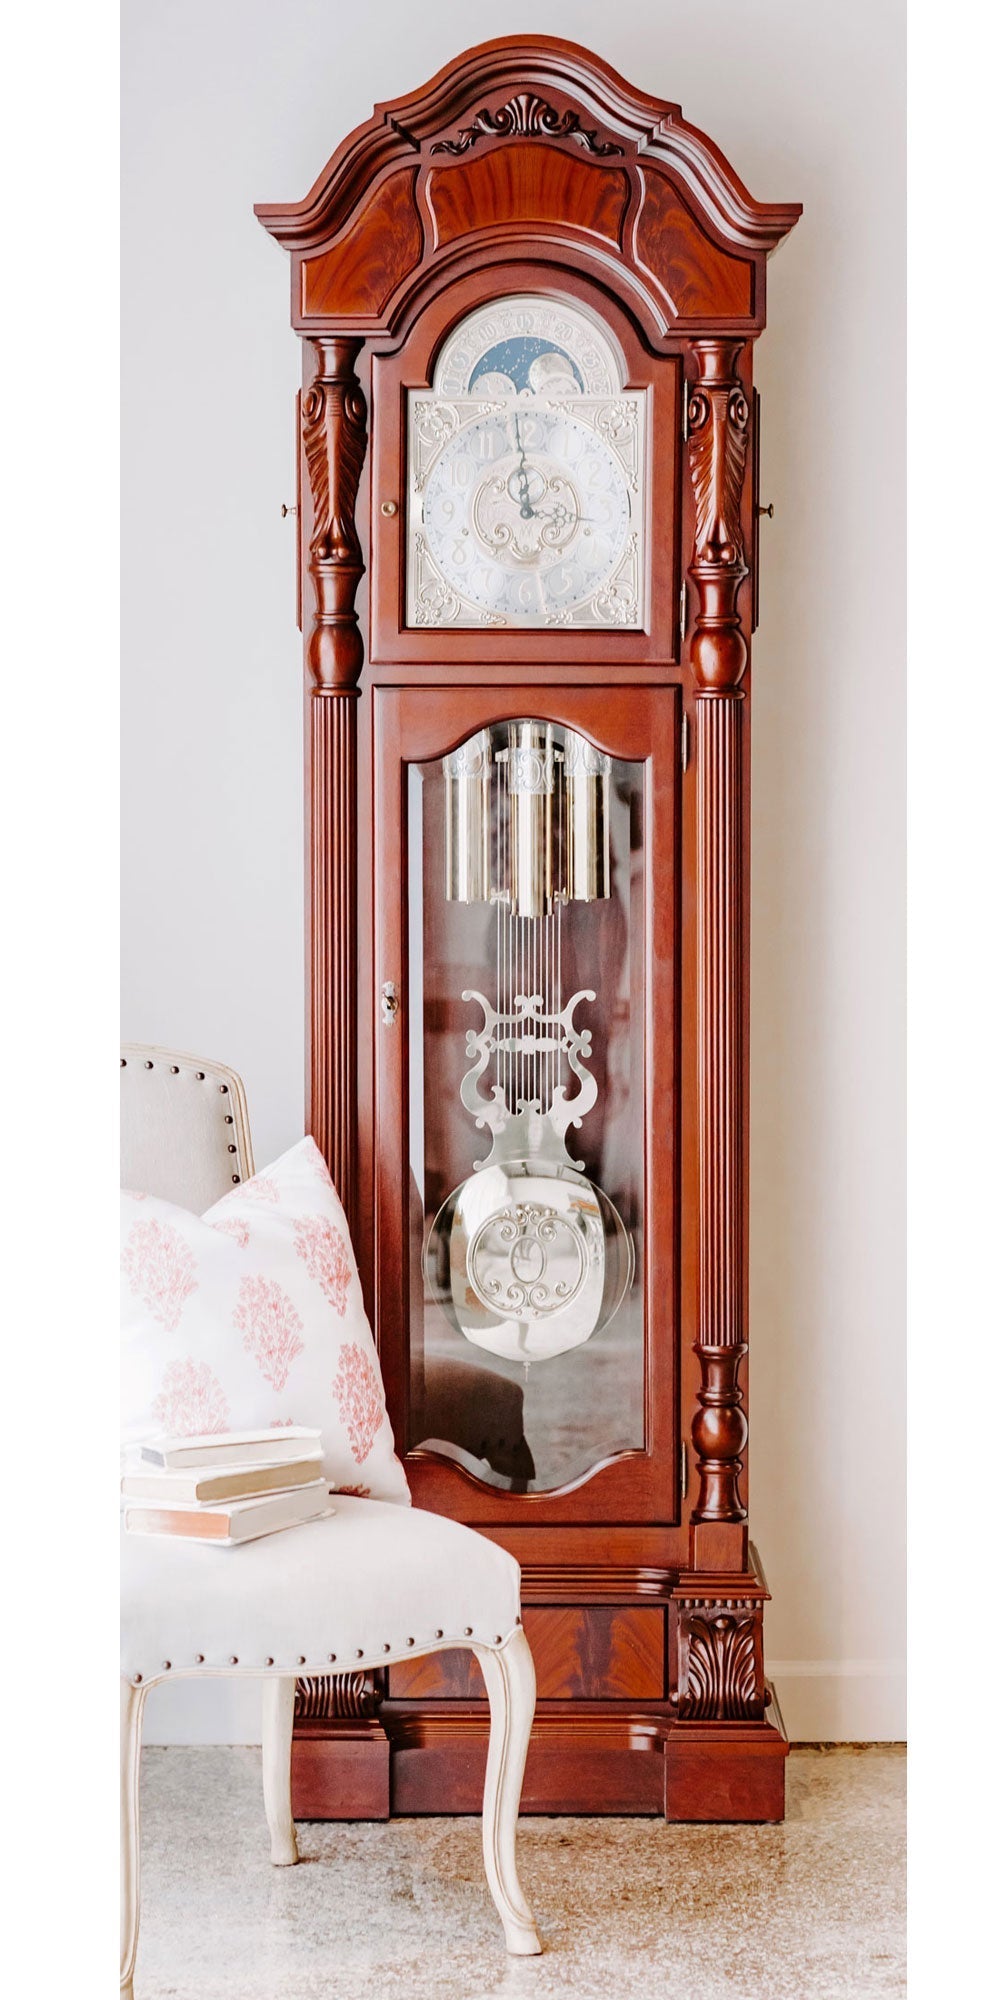 Anstead Grandfather Clock by Hermle Clocks